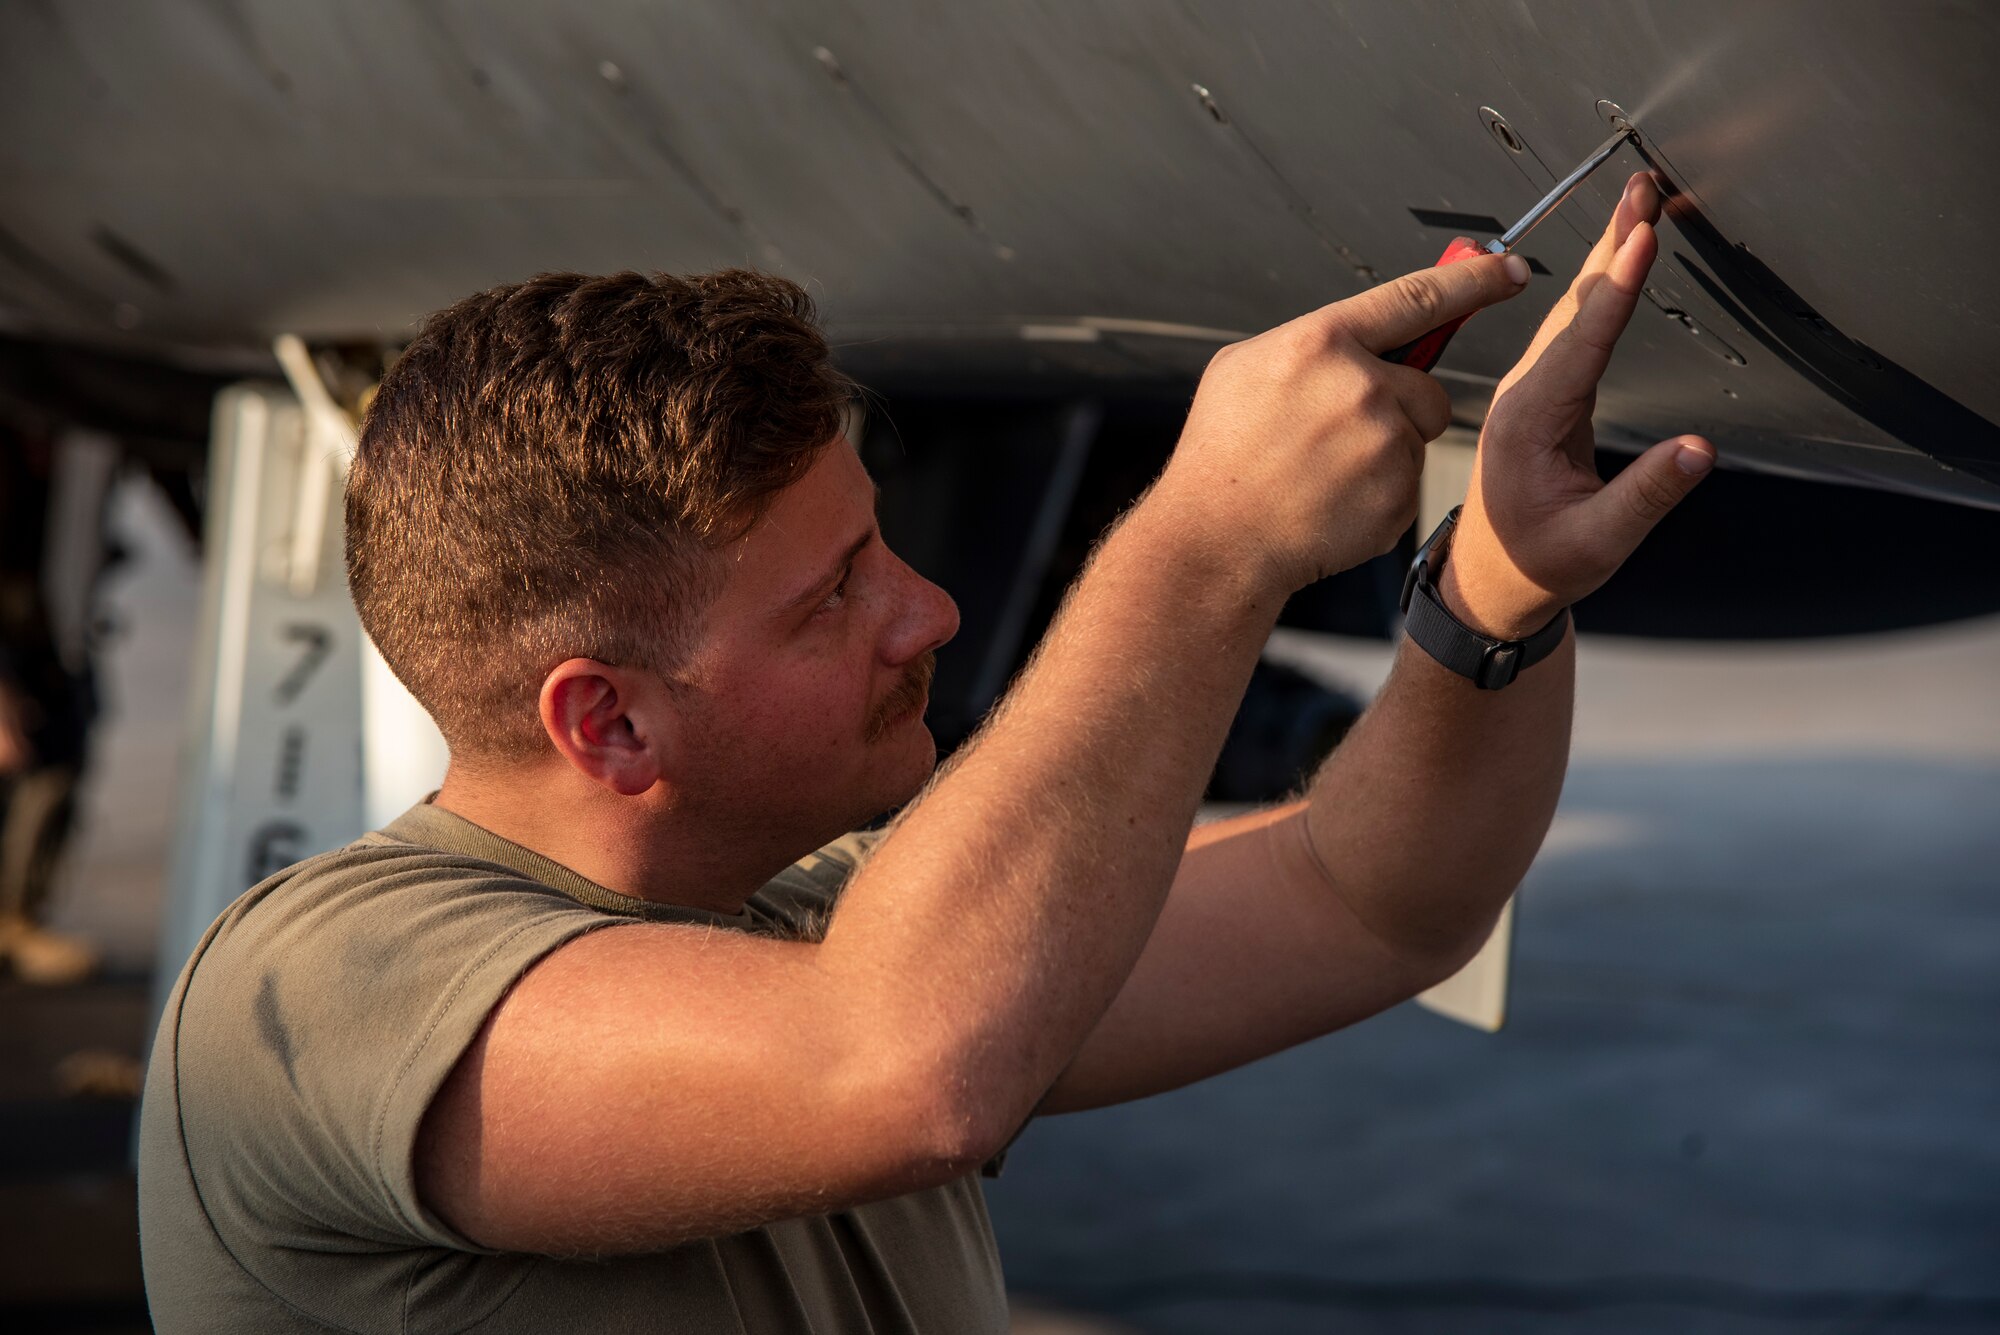 Airman 1st Class William Phillips, 389th Expeditionary Fighter Squadron crew chief, tightens a panel during a preflight inspection on an F-15E Strike Eagle at an undisclosed location, Southwest Asia, Nov. 15, 2022. Preflight checks allow aircrew to guarantee that all systems are working properly, reducing the risk of in-flight emergencies. (U.S. Air Force photo by: Tech. Sgt. Jim Bentley)